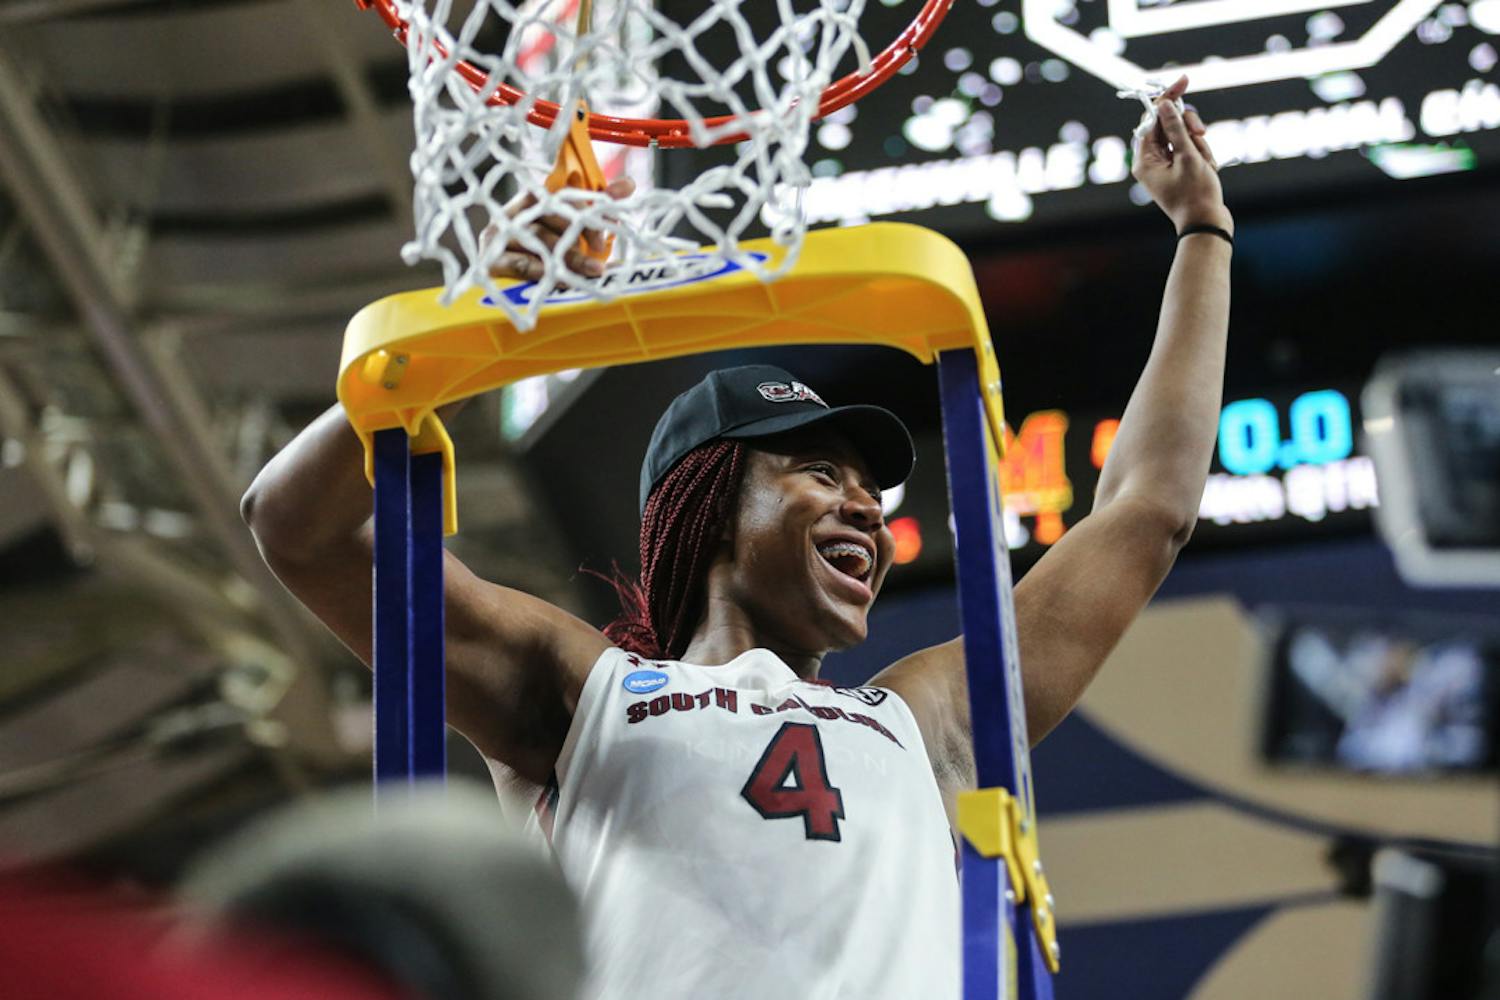 The South Carolina women's basketball team advanced to the Final Four after winning the NCAA Regional Championship at the Bon Secours Wellness Arena in Greenville, S.C. on March 27, 2023. South Carolina defeated Maryland 86-75.